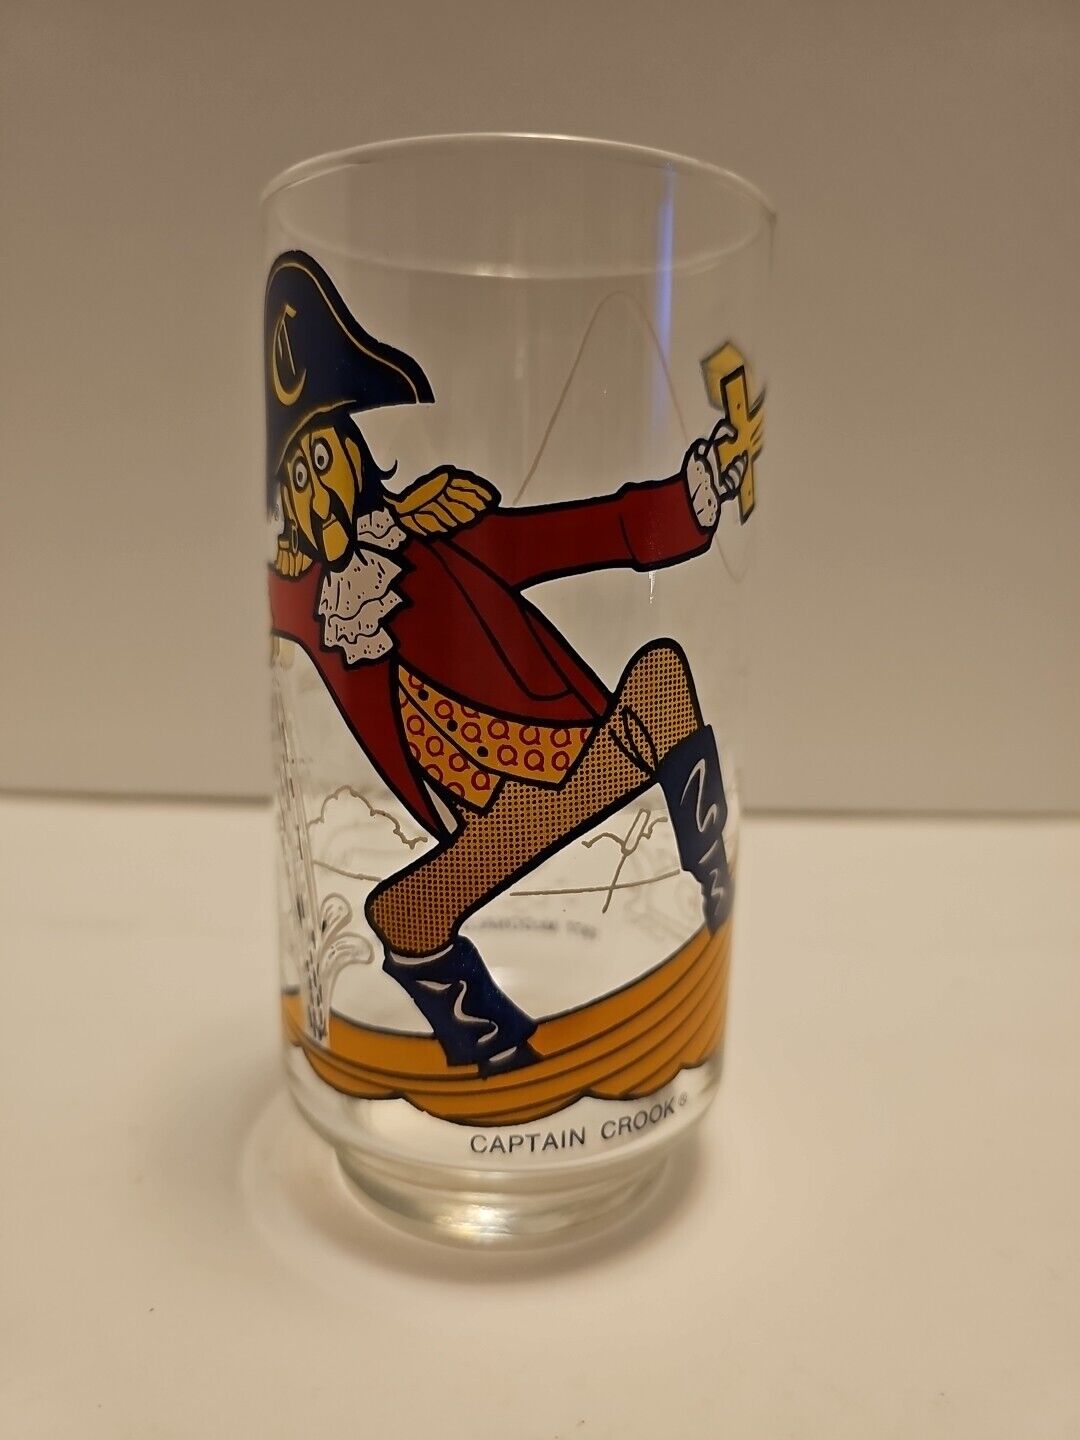 1977 VINTAGE McDONALD\'S ACTION SERIES GLASS - CAPTAIN  CROOK VERY NICE CONDITION